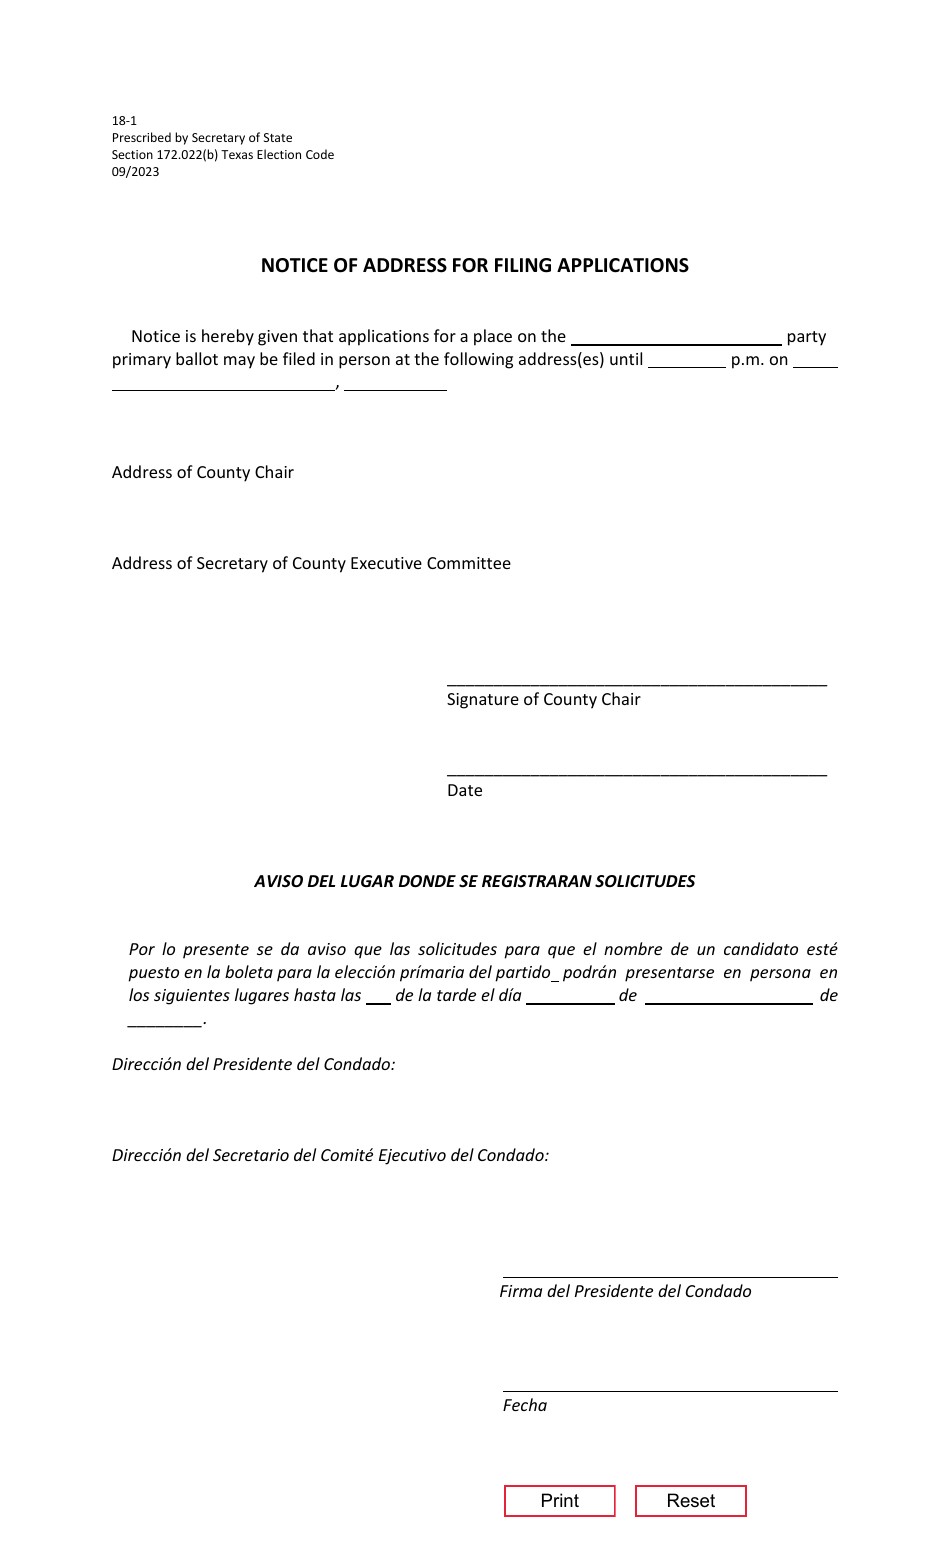 Form 18-1 Notice of Address for Filing Applications - Texas (English / Spanish), Page 1